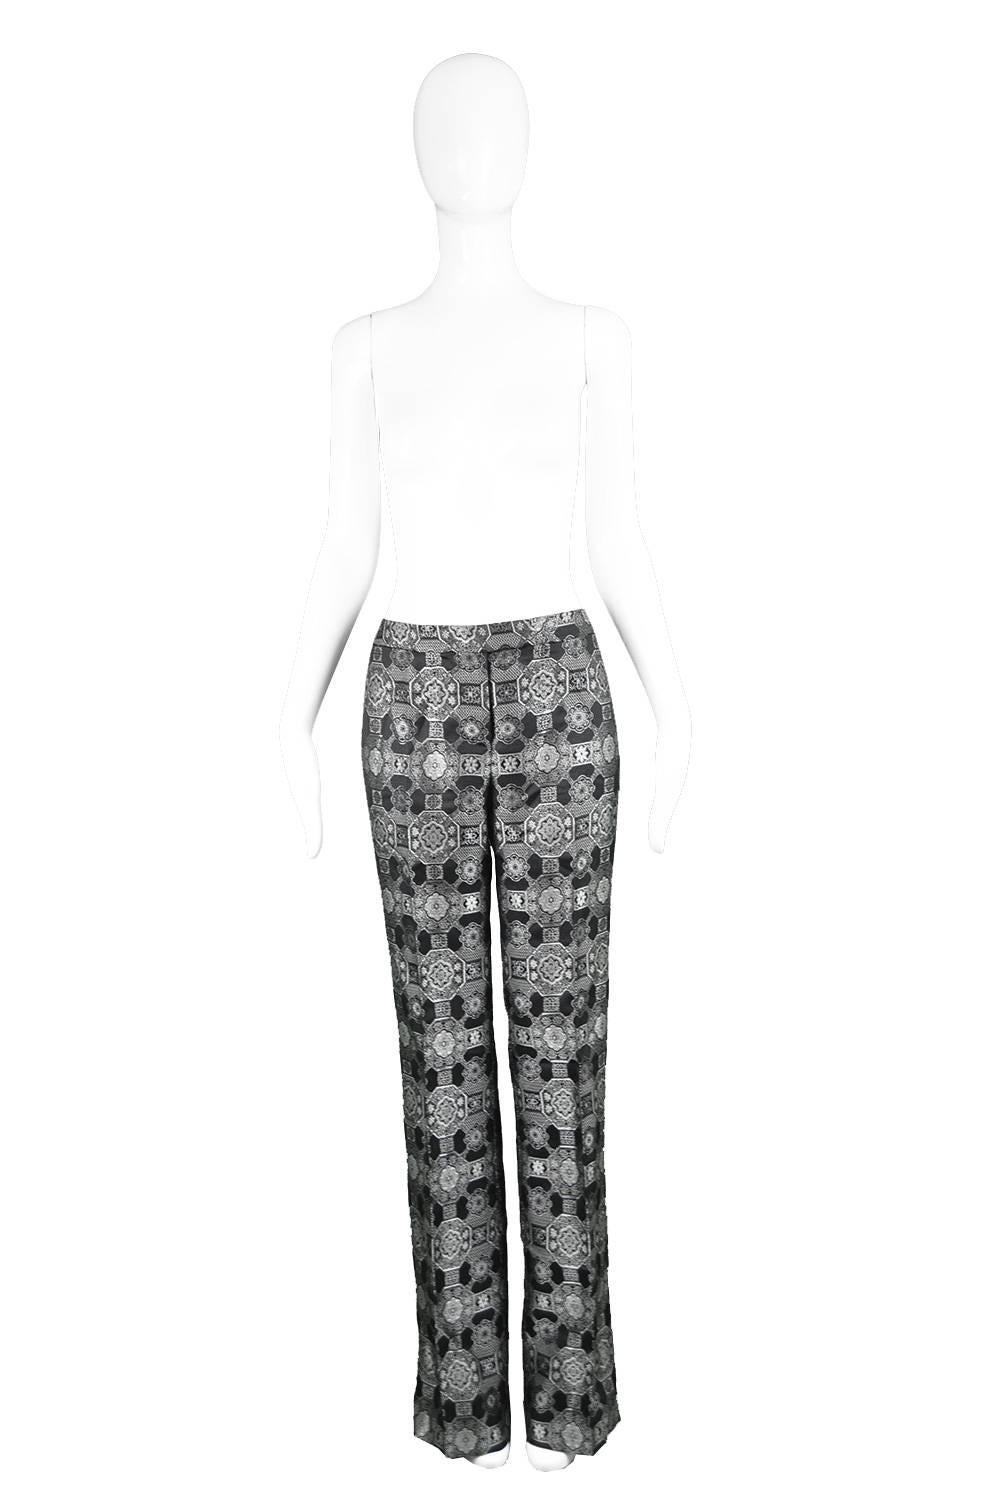 Alexander Mcqueen Black & Silver Metallic Brocade Pants, A/W 2003

Estimated Modern Size: UK 12-14/ US 8-10/ EU 40-42. Would suit a taller woman with heels due to long leg but could always be taken up by a seamstress. Please check measurements.
Low